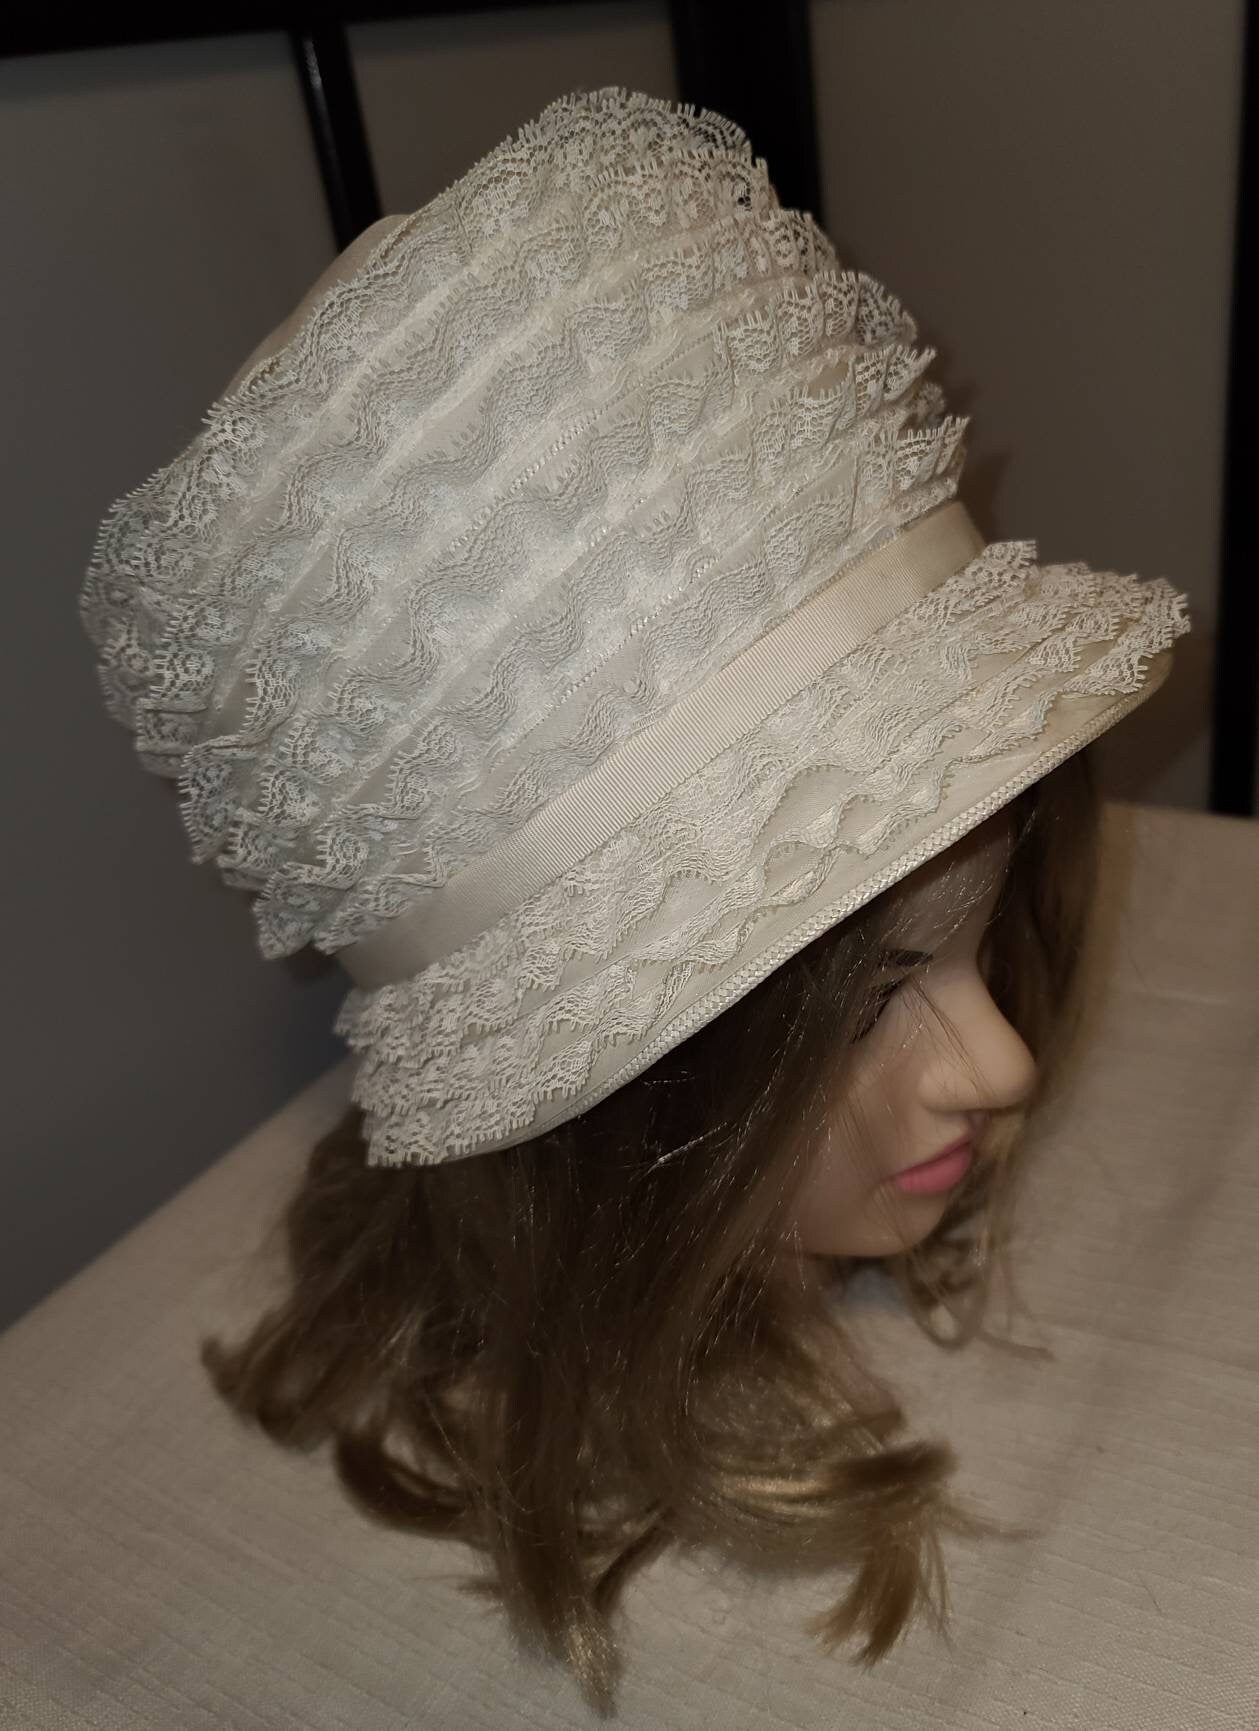 Vintage Lace Hat 1960s Tall Round White Lace Ruffle Pouf Hat Small Brim Back Bow Mod Boho Wedding Bridal 21.5 in.